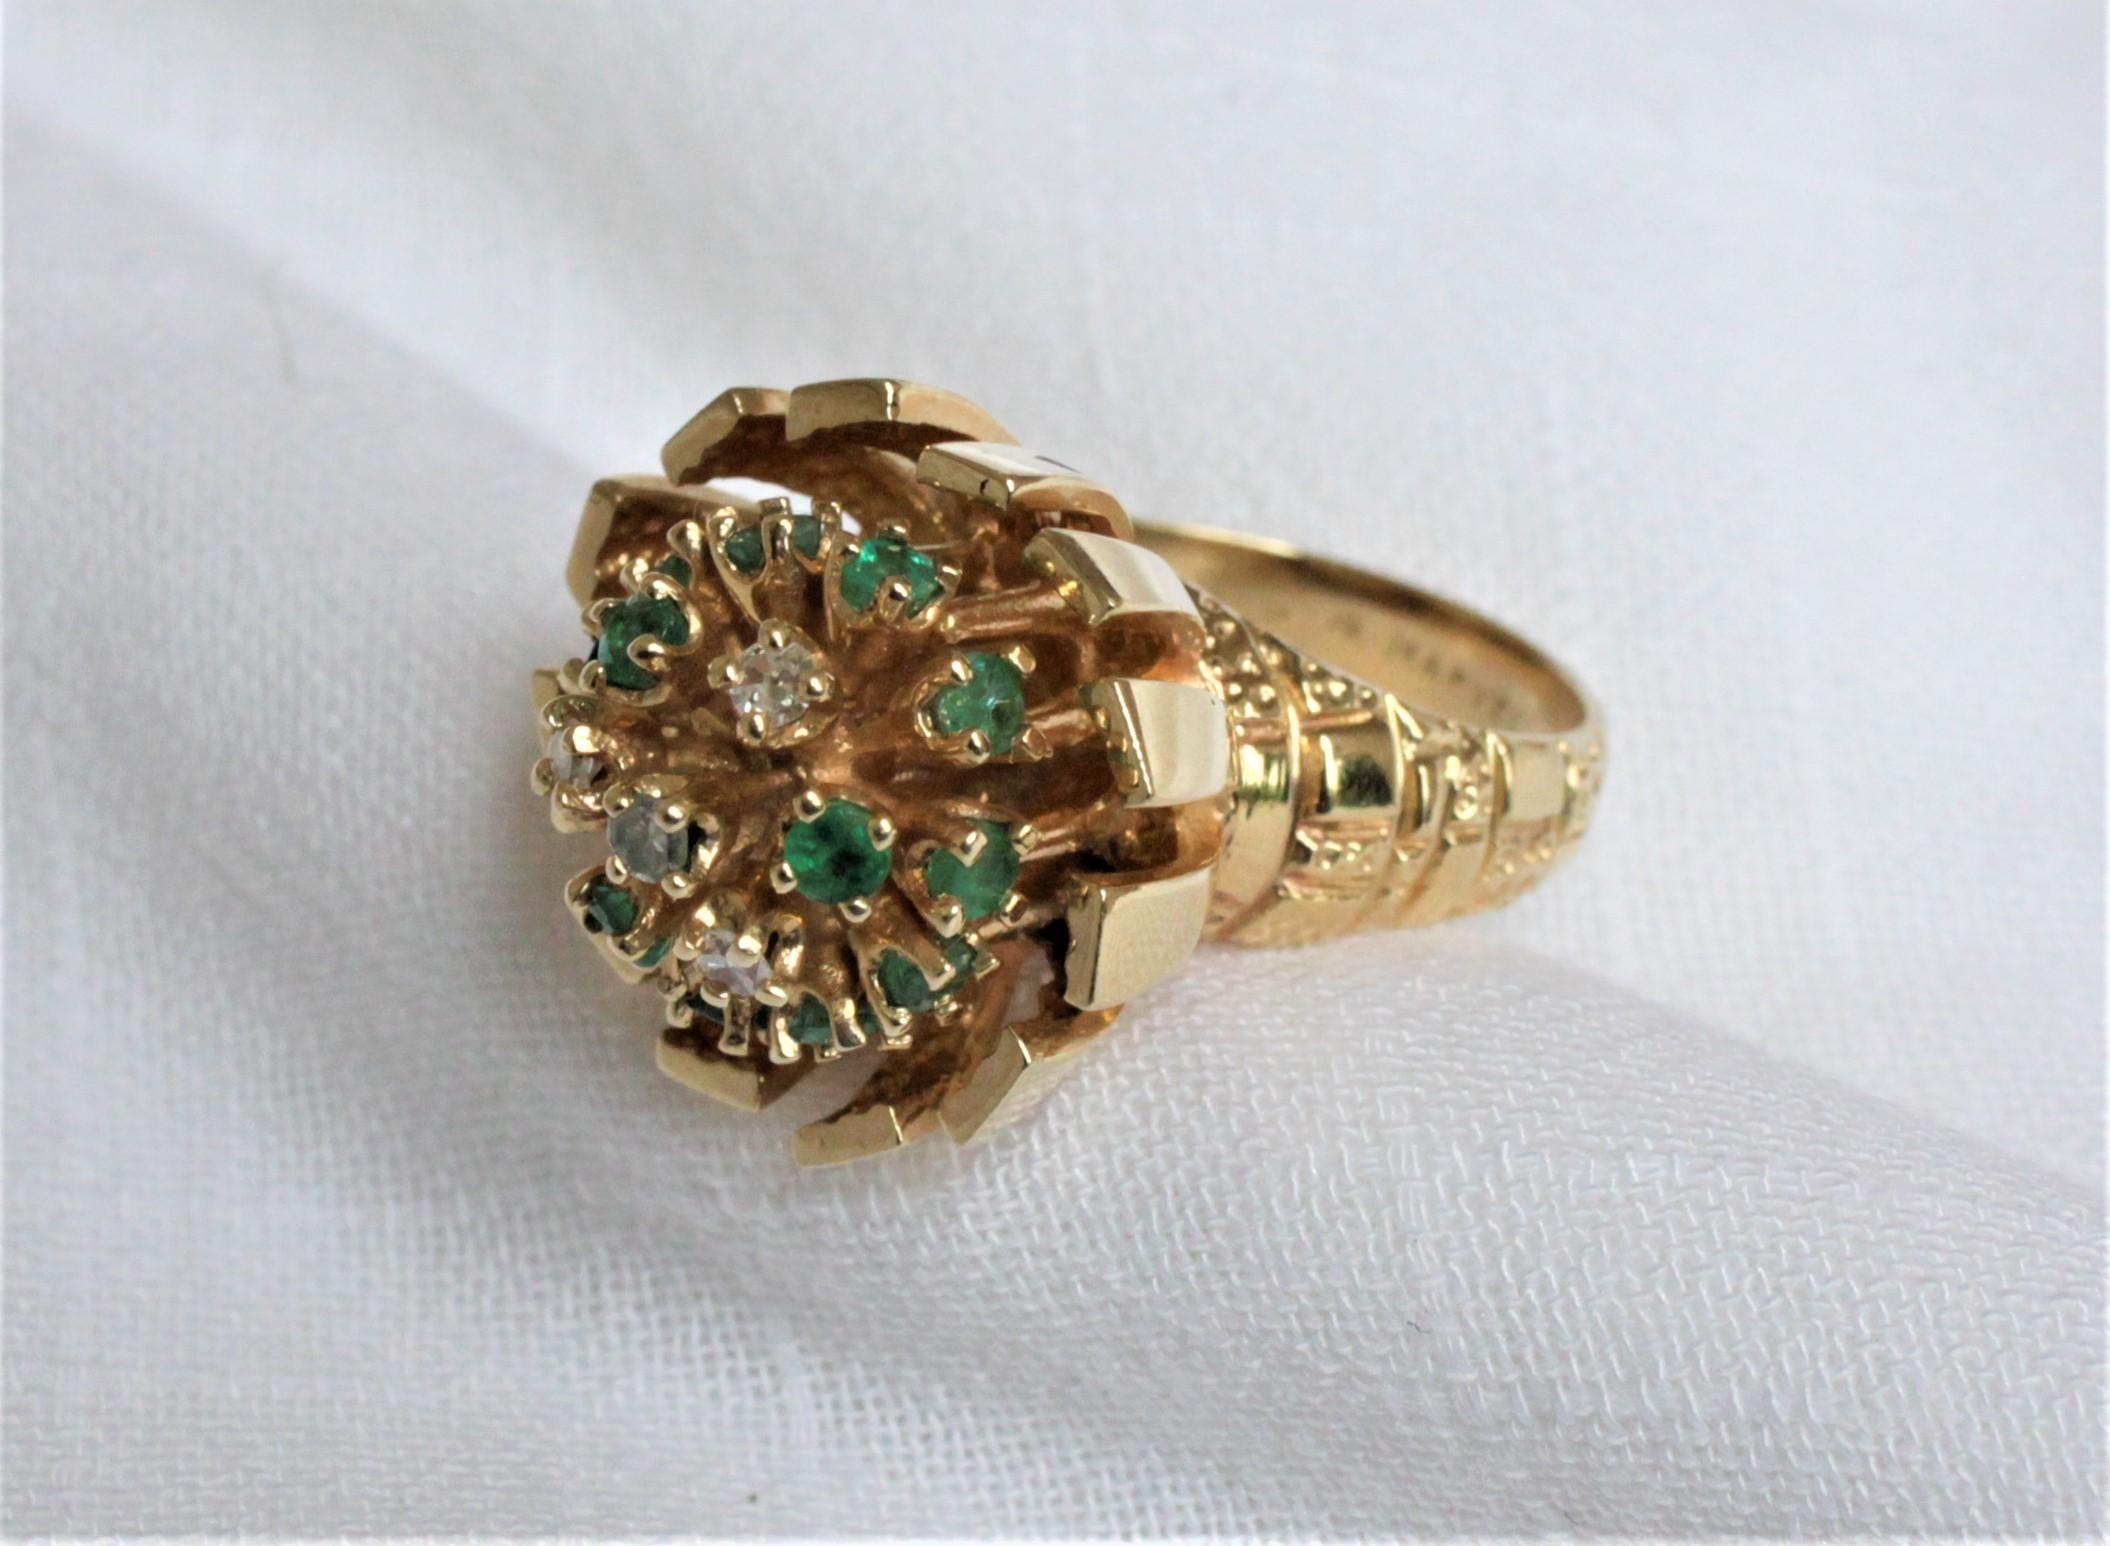 This very substantial ladies yellow gold cocktail ring is presumed to have been made in the United States during the 1960s in a midcentury style. The ring is stamped 14-karat and features 4 single cut and prong set diamonds which are layered in